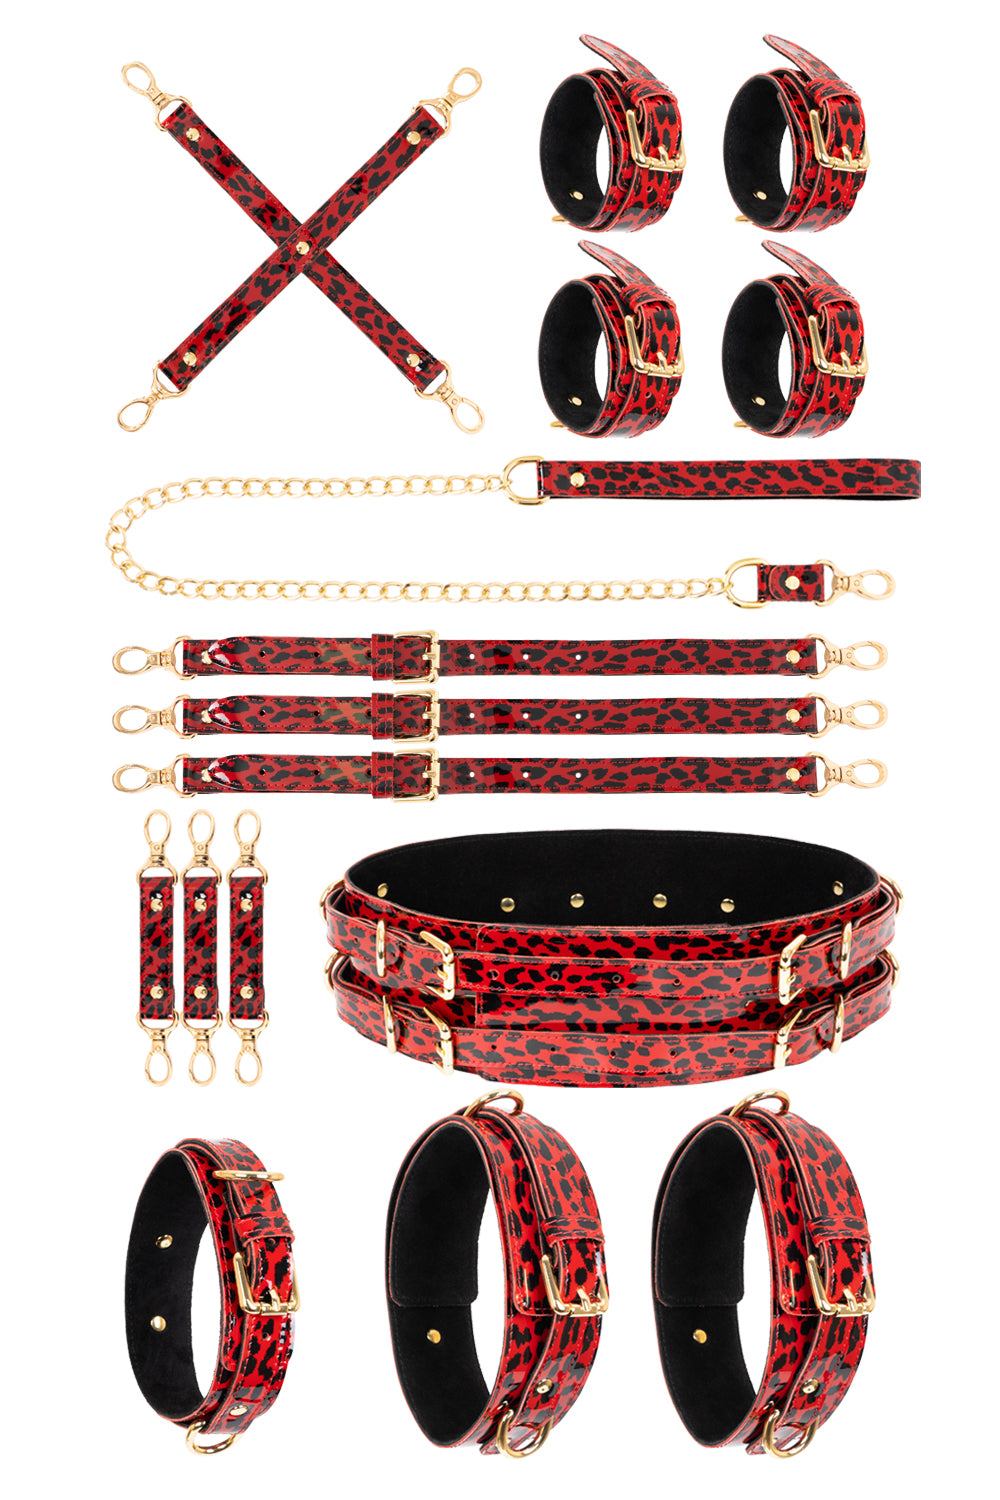 Lacquered leather FULL Set with chain leash. Burgundy